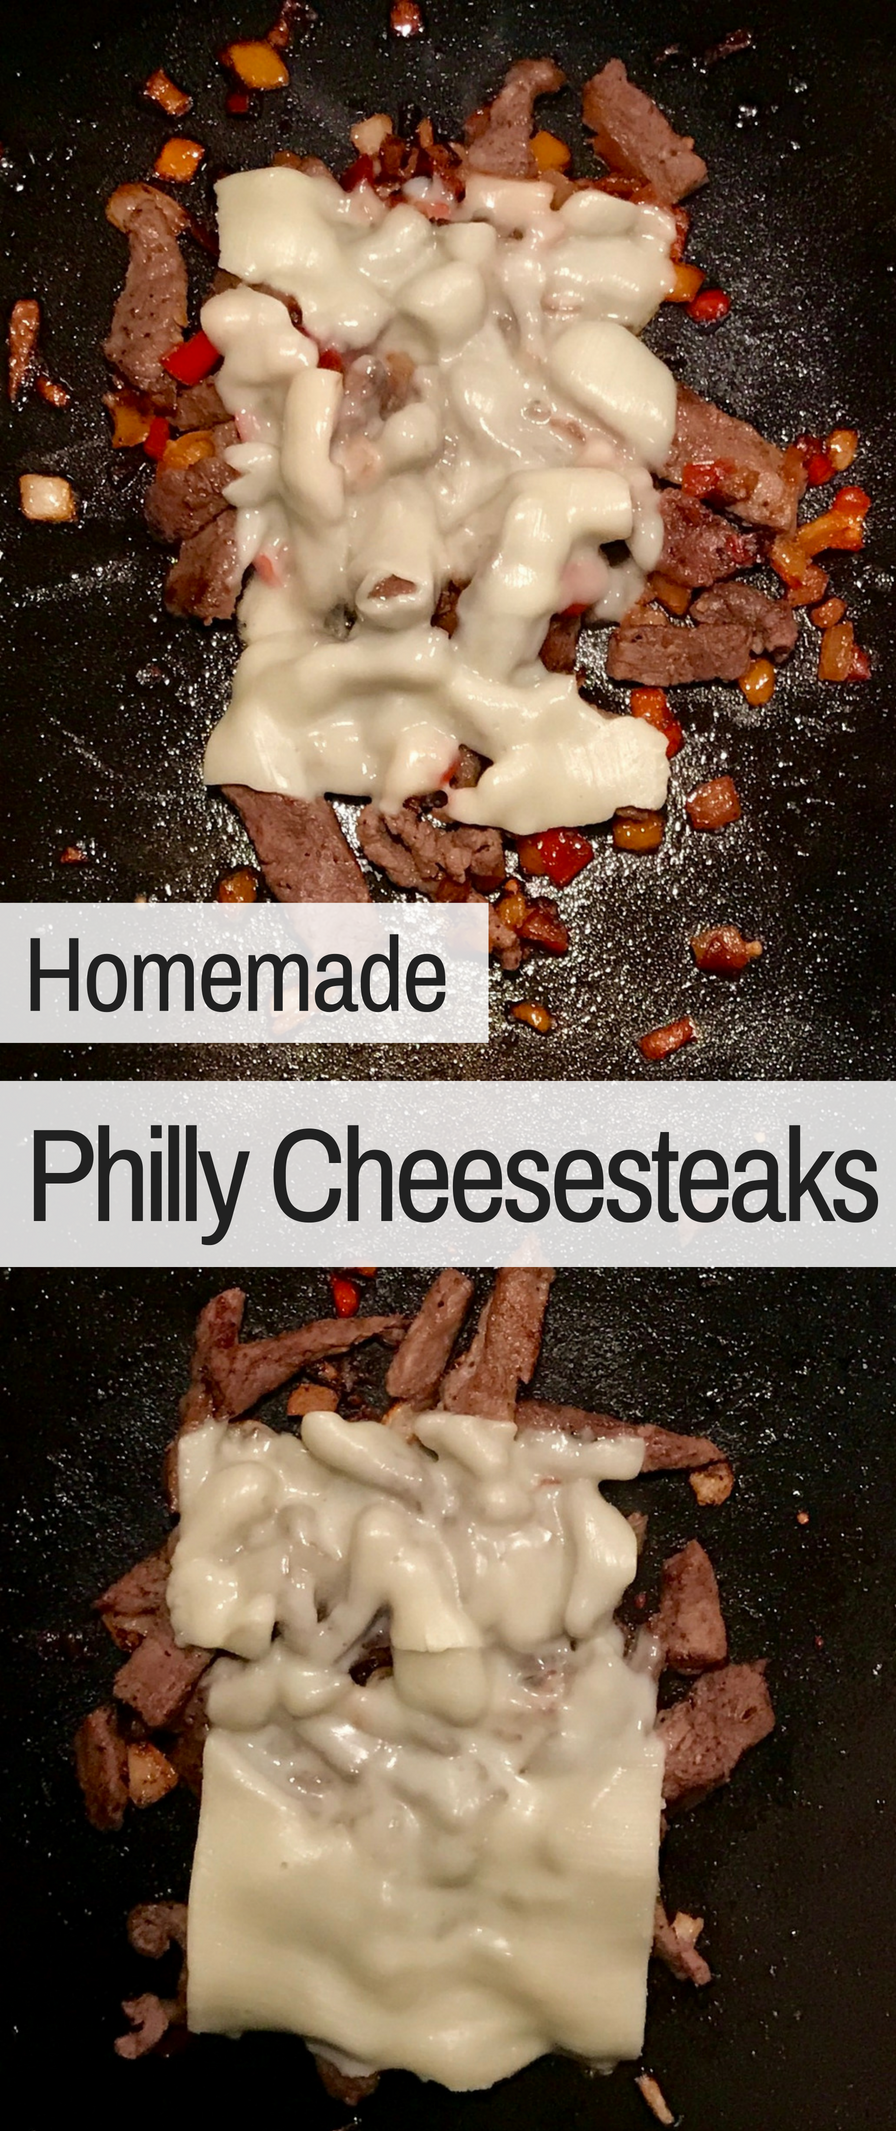 Homemade Philly Cheesesteaks Recipe